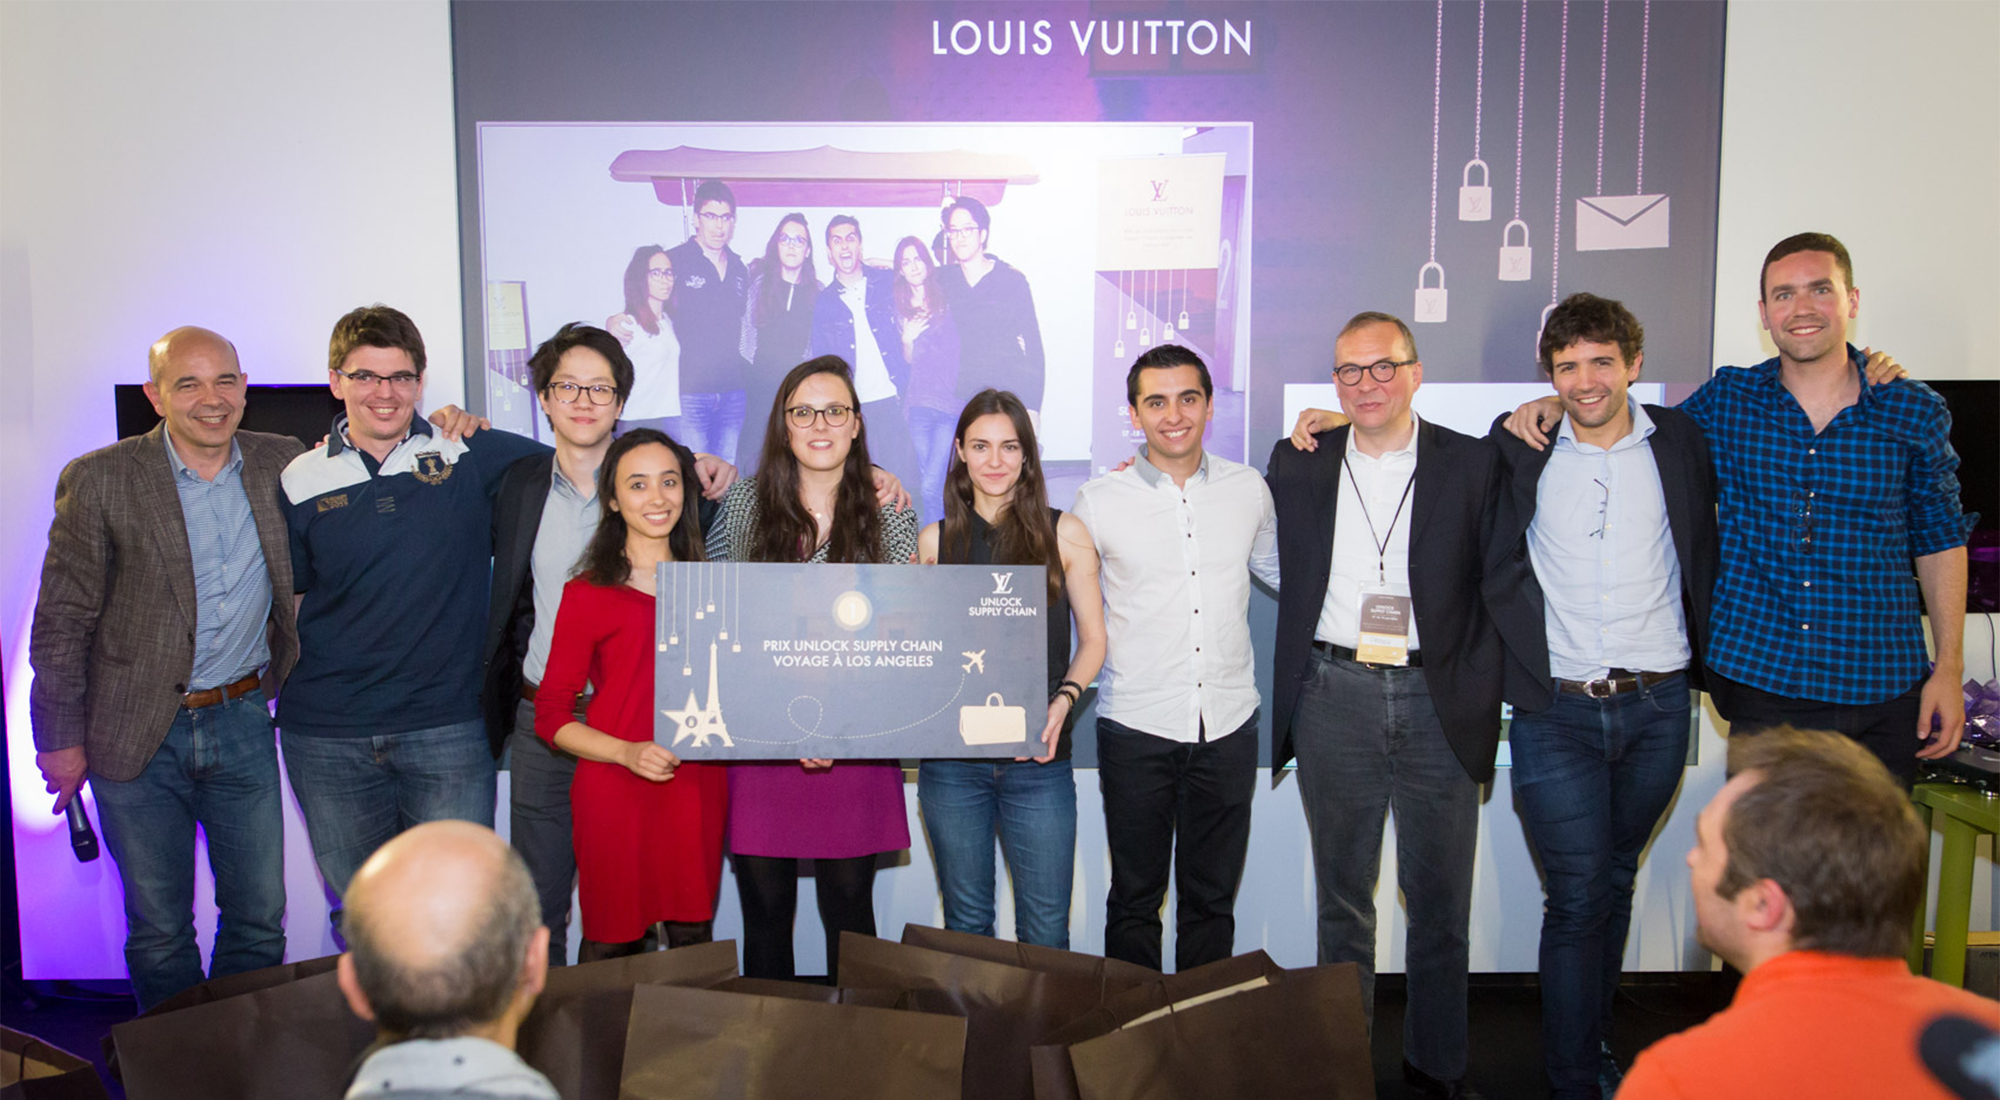 Louis Vuitton's second Hackathon to build a connected luxury supply chain 